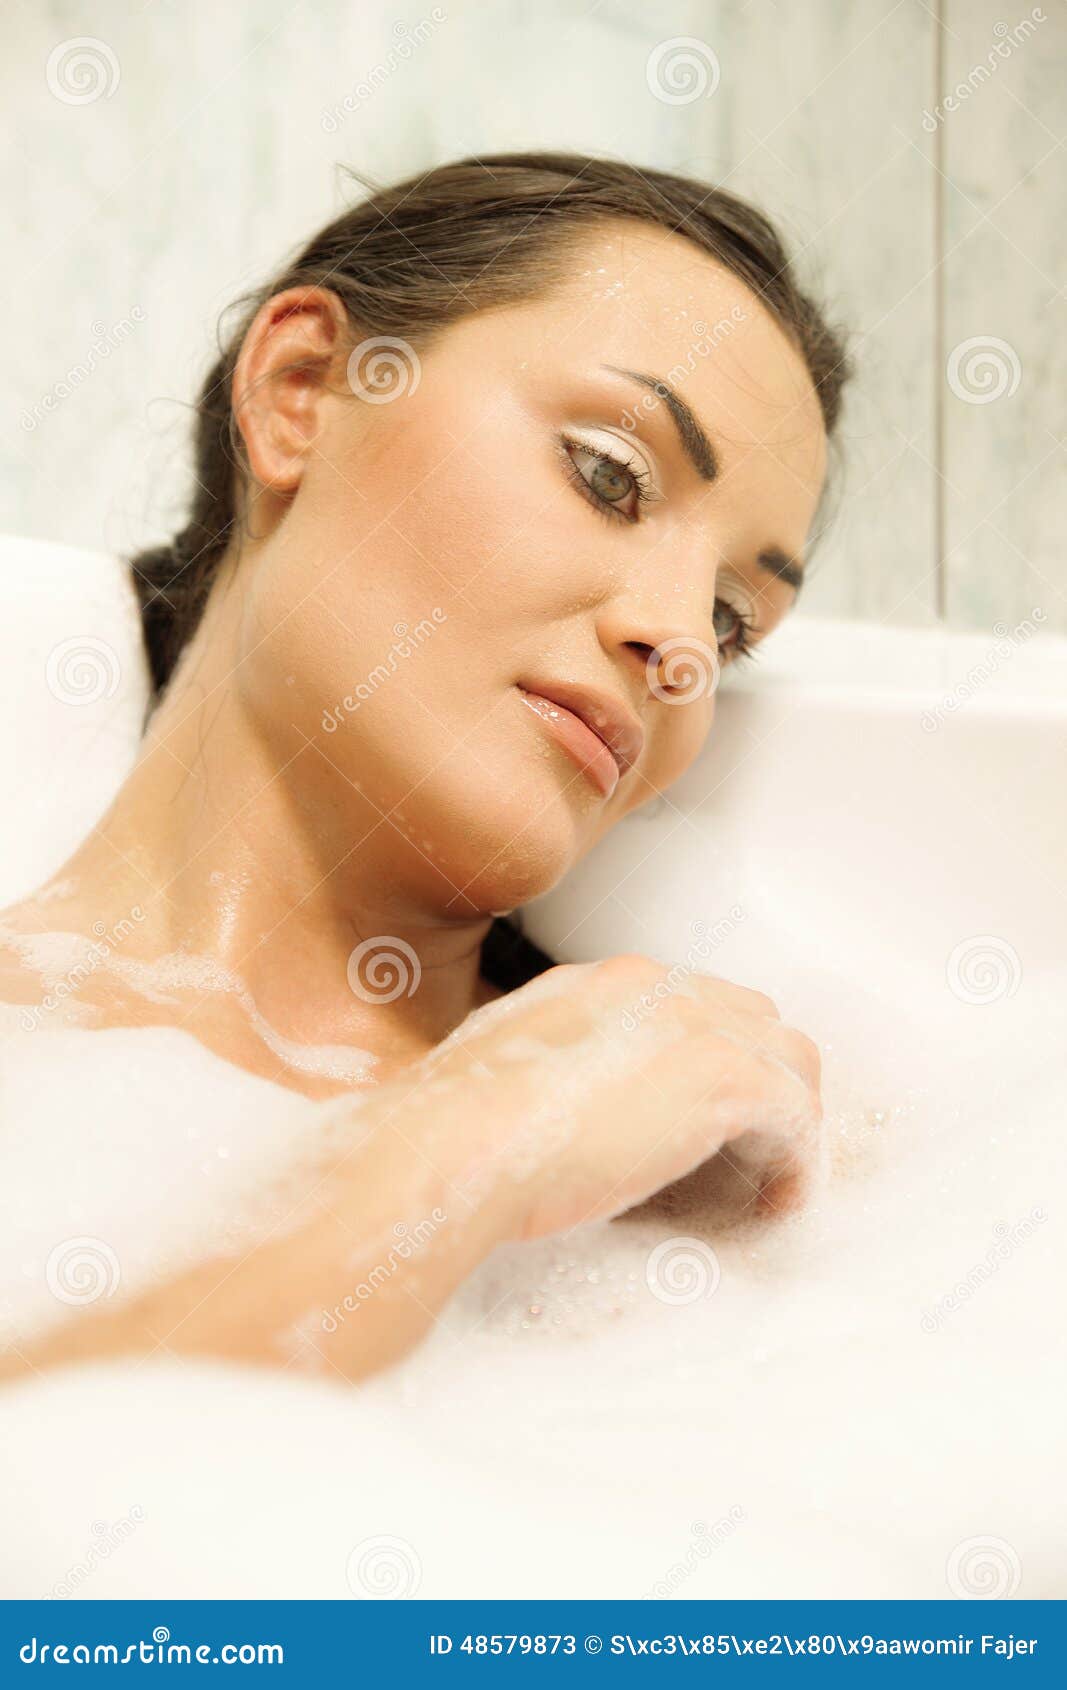 Lady in Her Bath